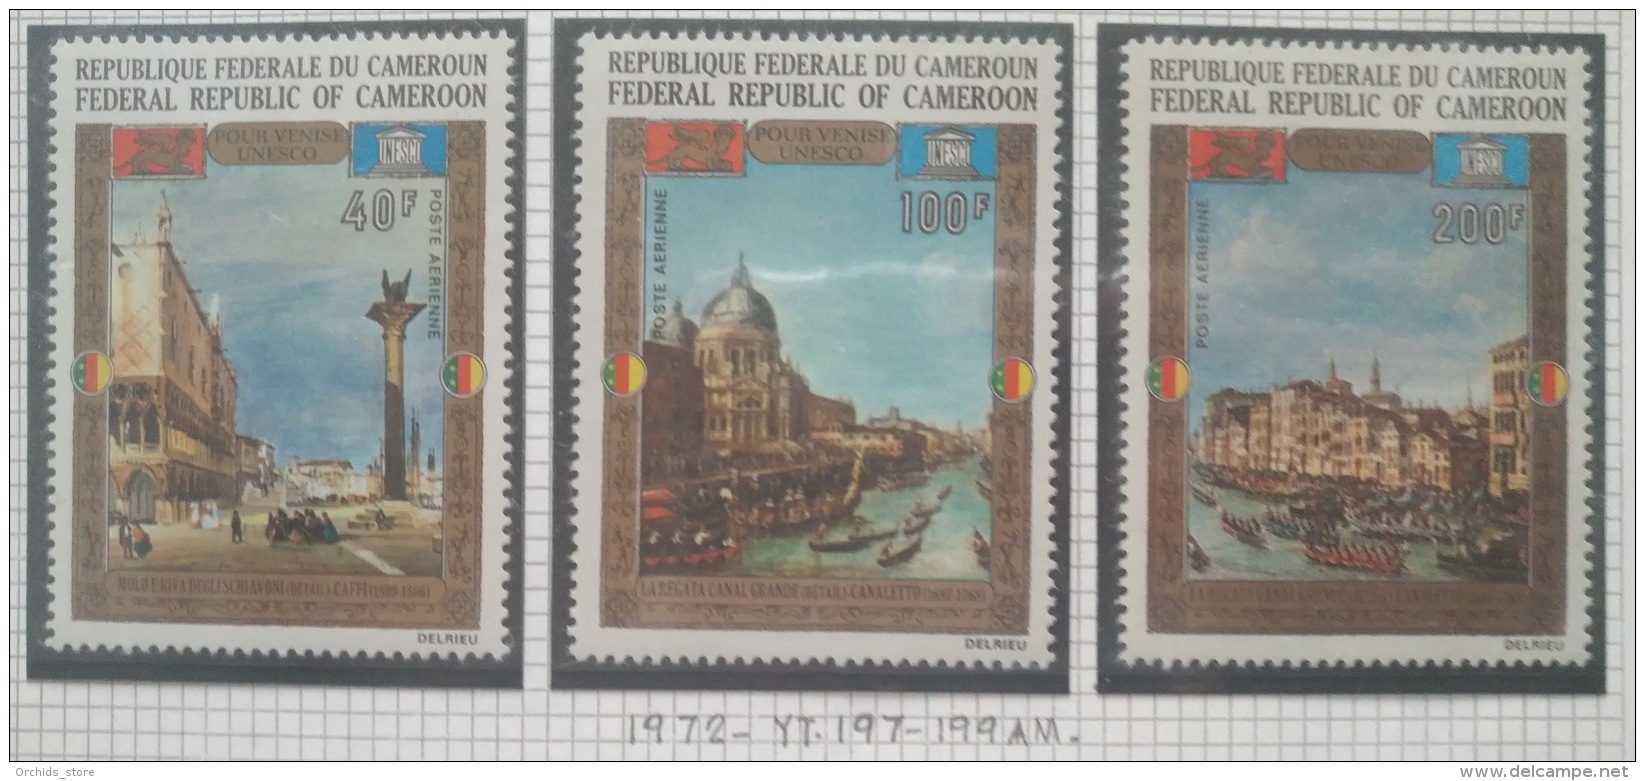 P7 Paintings - Cameroon 1972 Yv. 197-199AM Complete Set 3v. MNH - UNESCO "Save Venice" Campaign - Cameroon (1960-...)